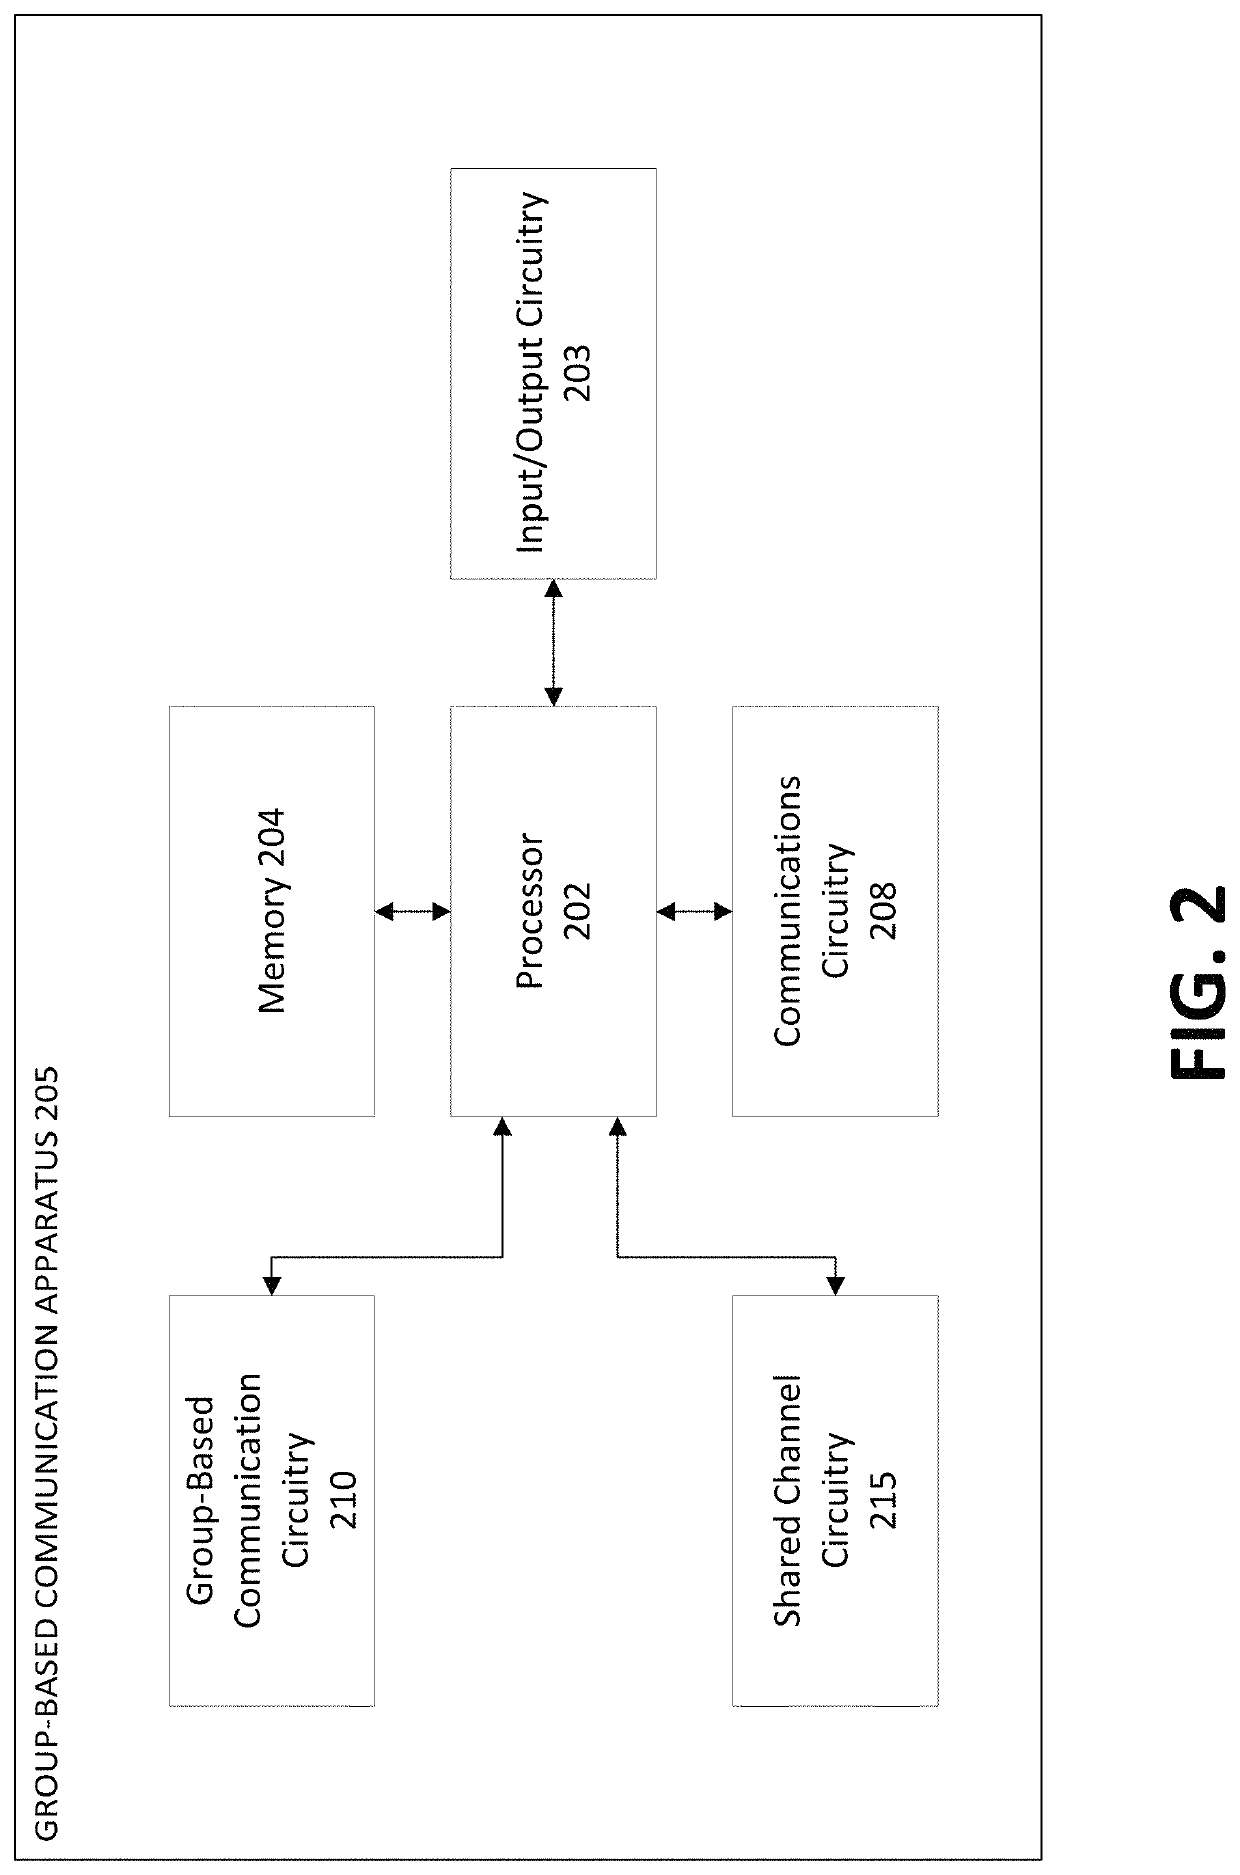 Authorizations associated with externally shared communication resources